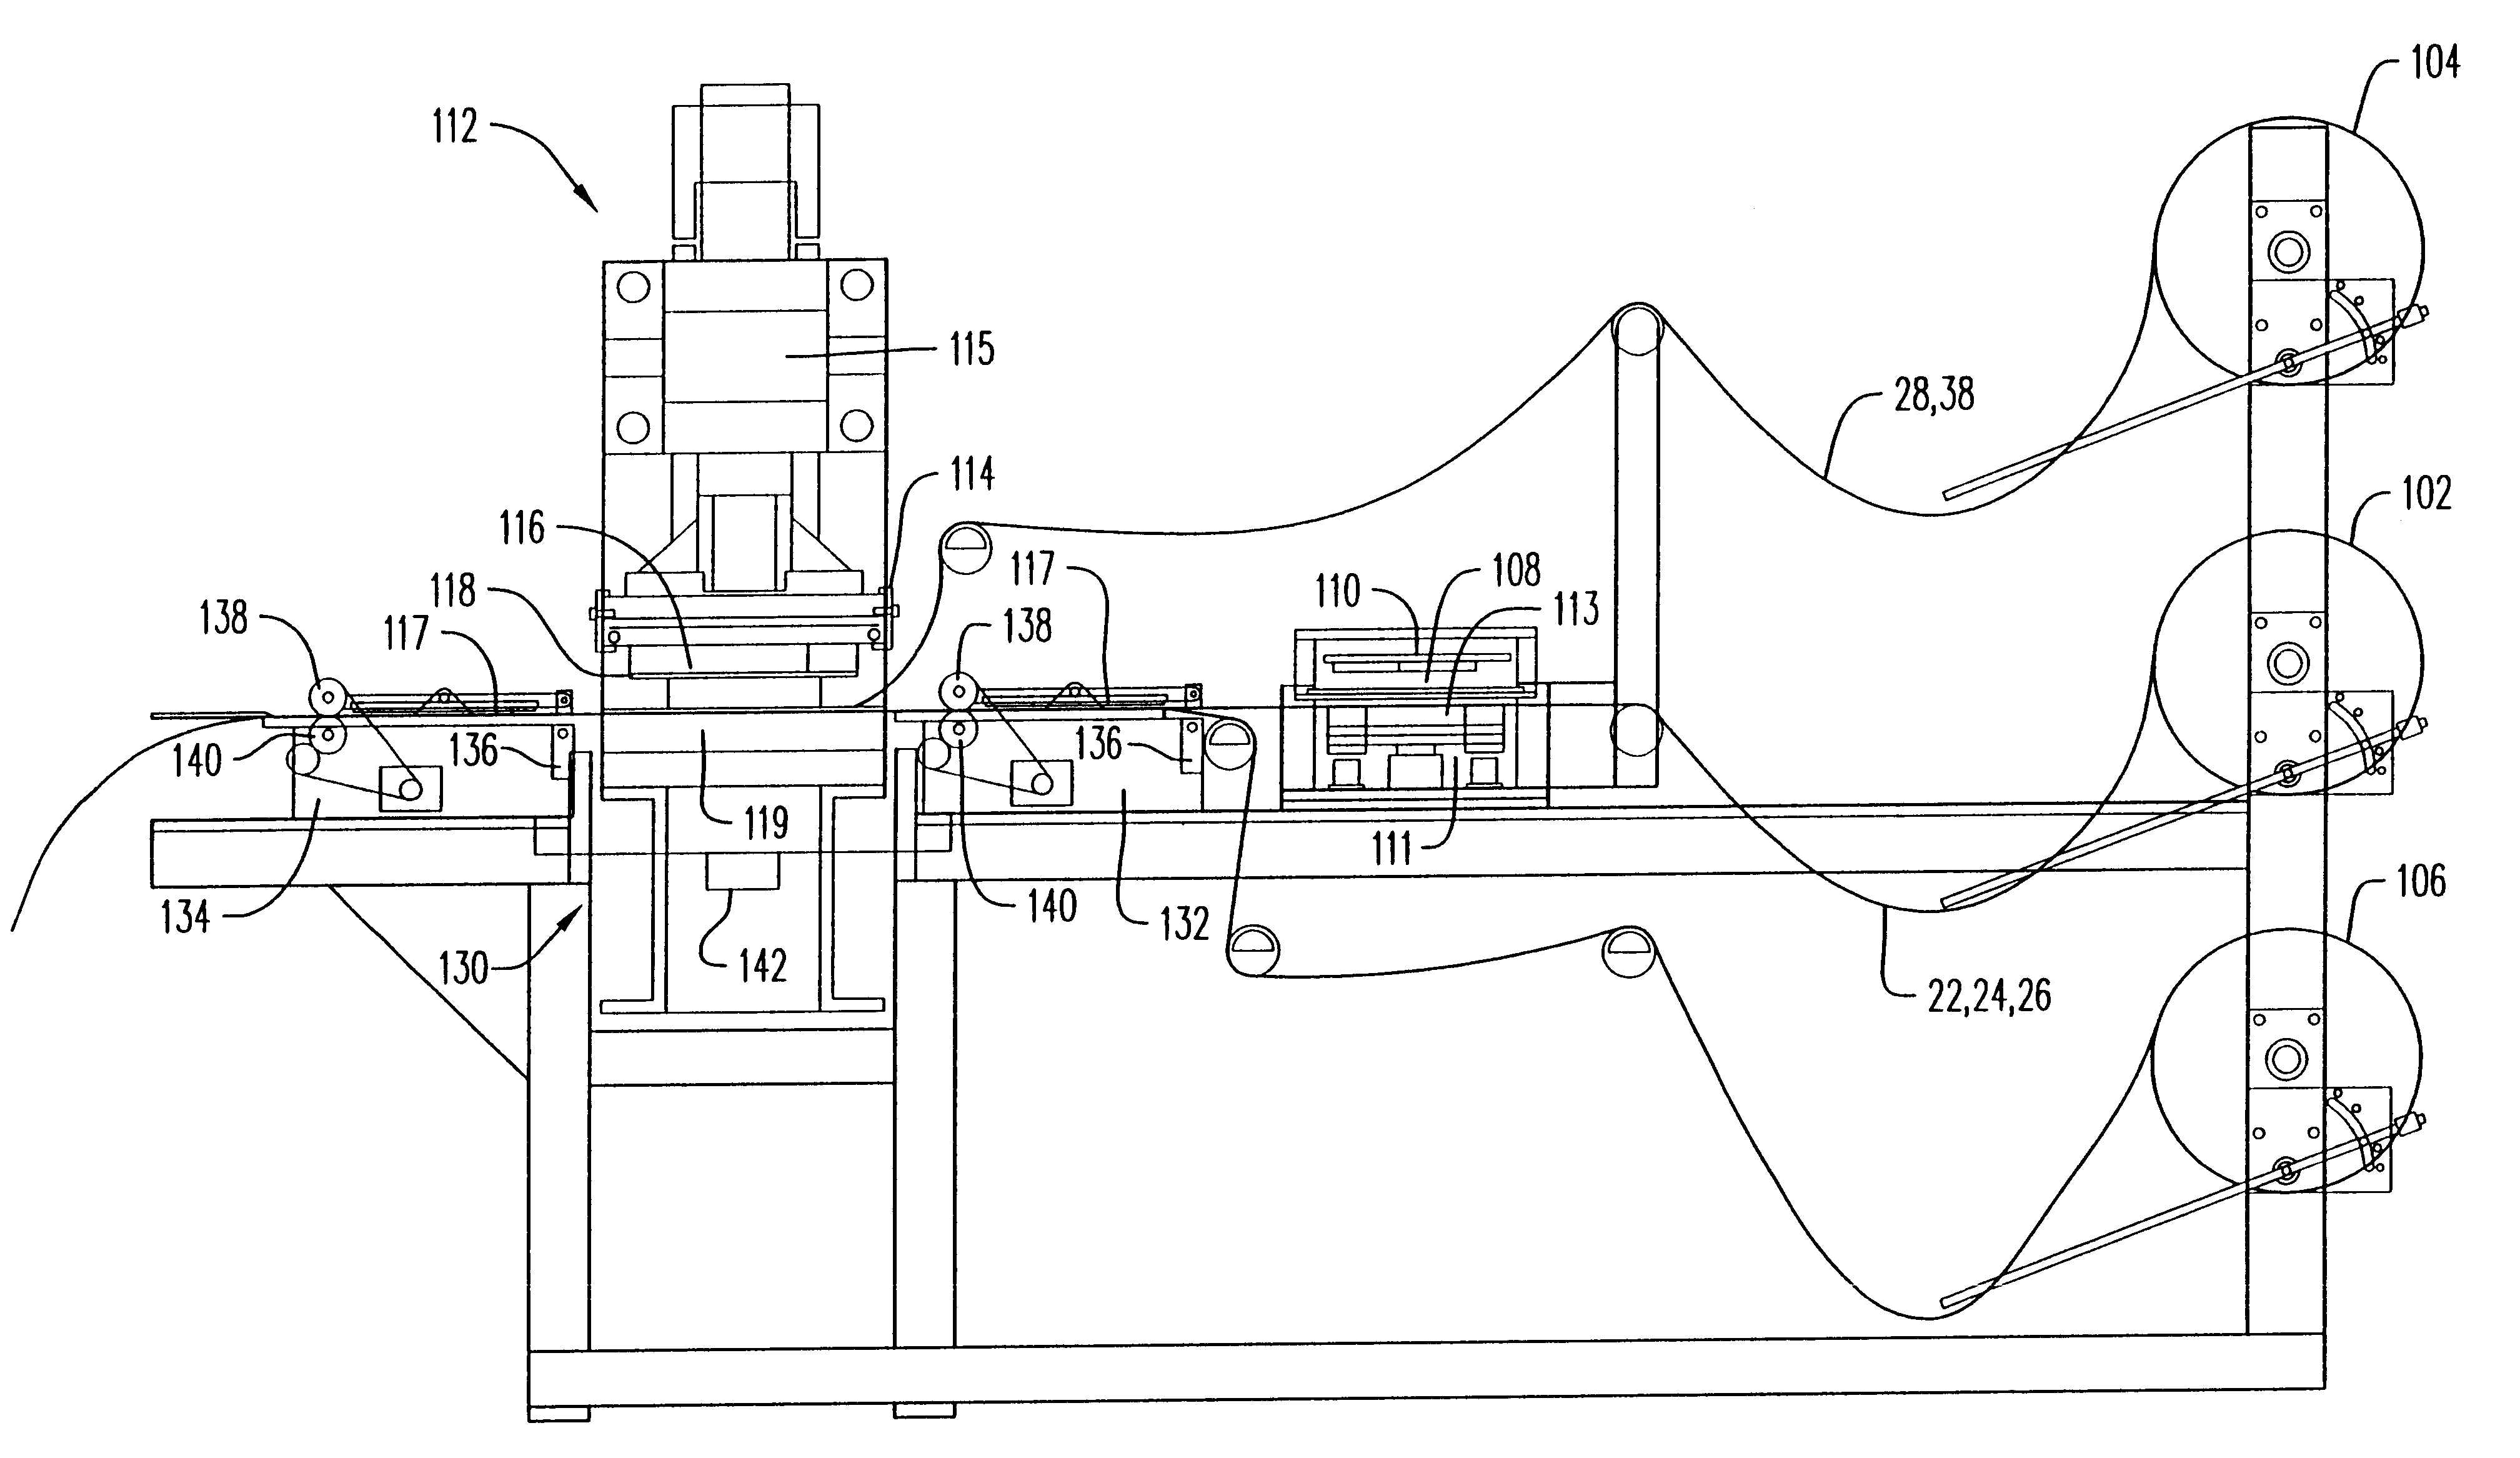 Device for making stretch cushion strap assemblies